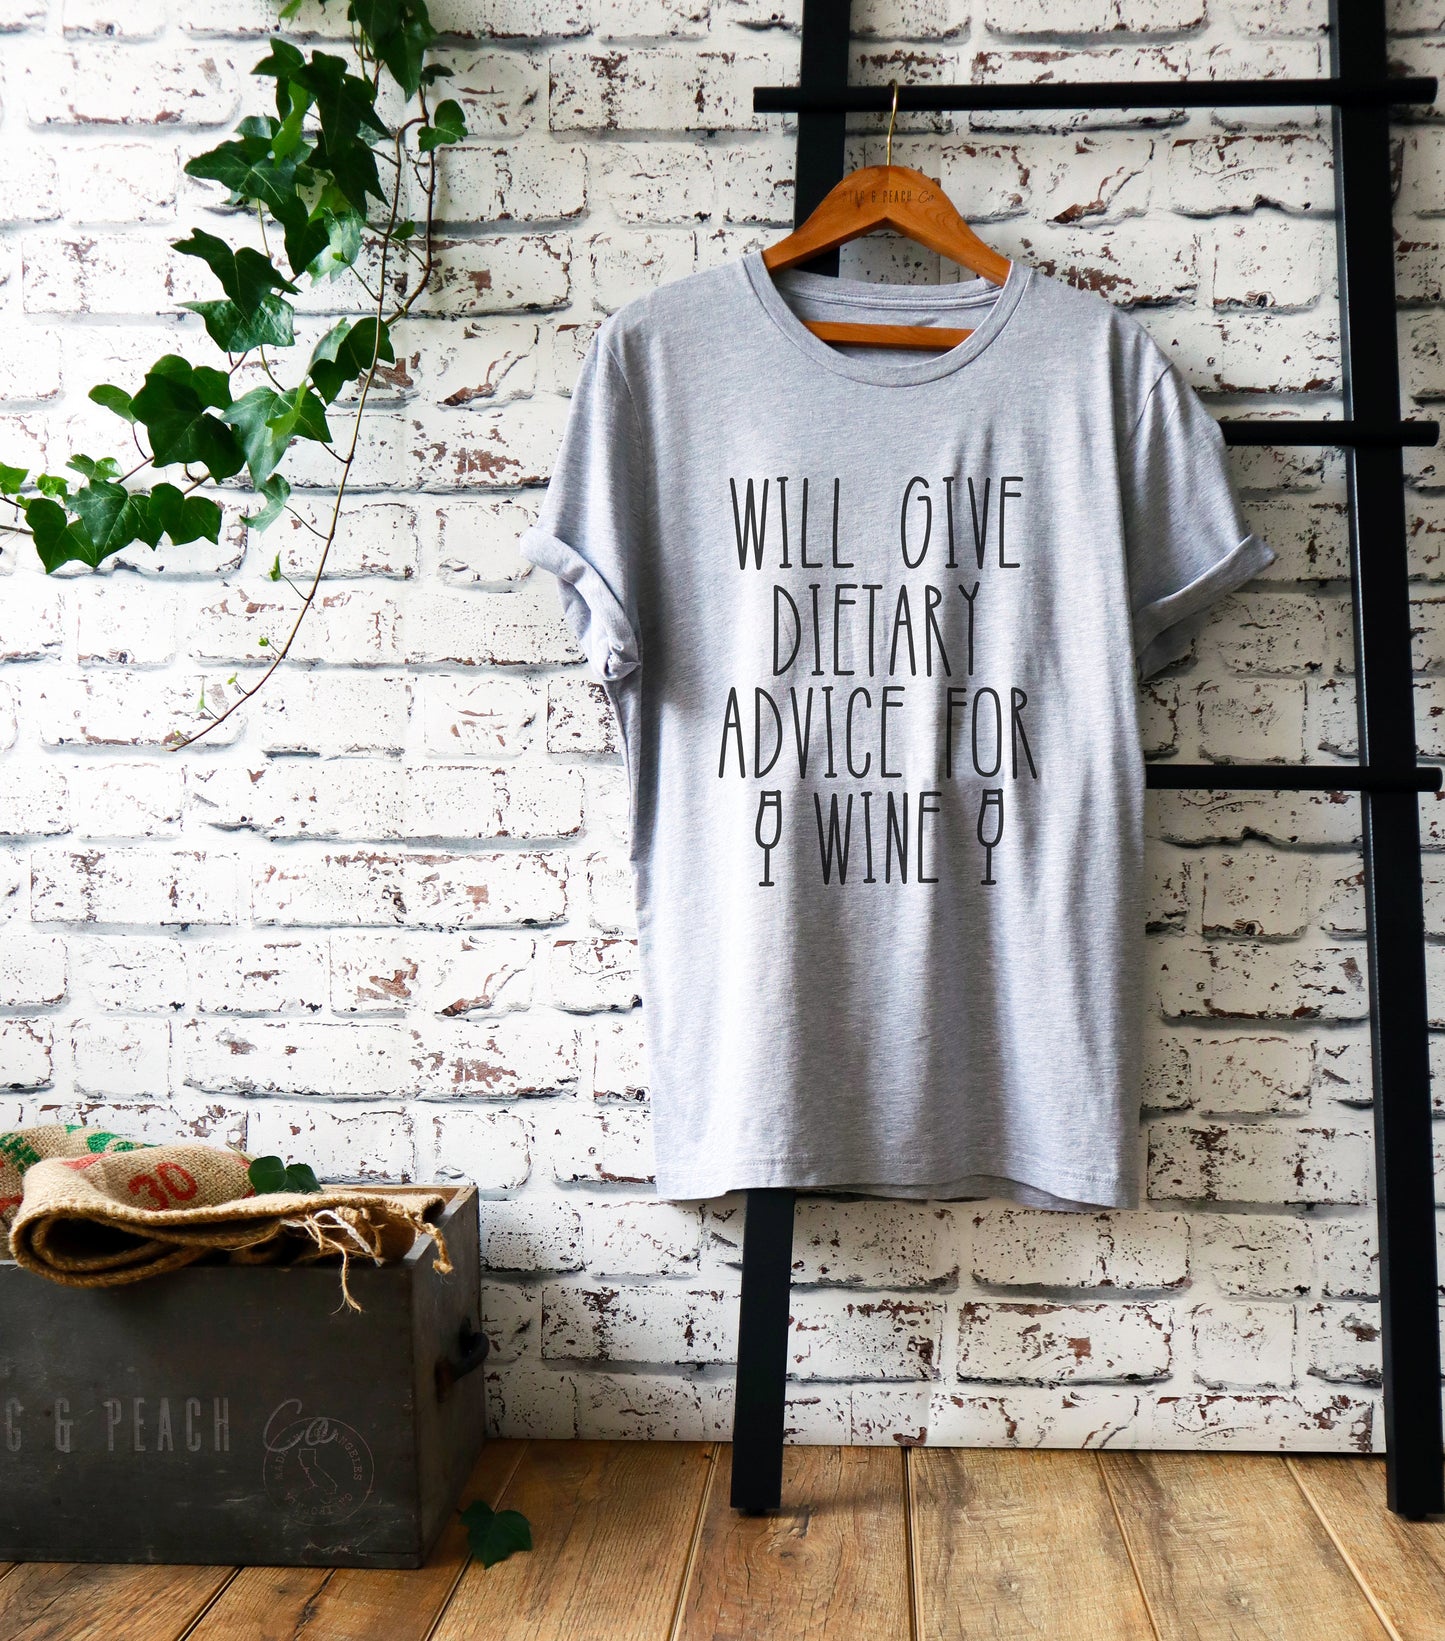 Will Give Dietary Advice For Wine Unisex Shirt -Dietitian Shirt, Dietician Shirt, Nutritionist Shirt,  RDN Shirt, Registered Dietitian Shirt